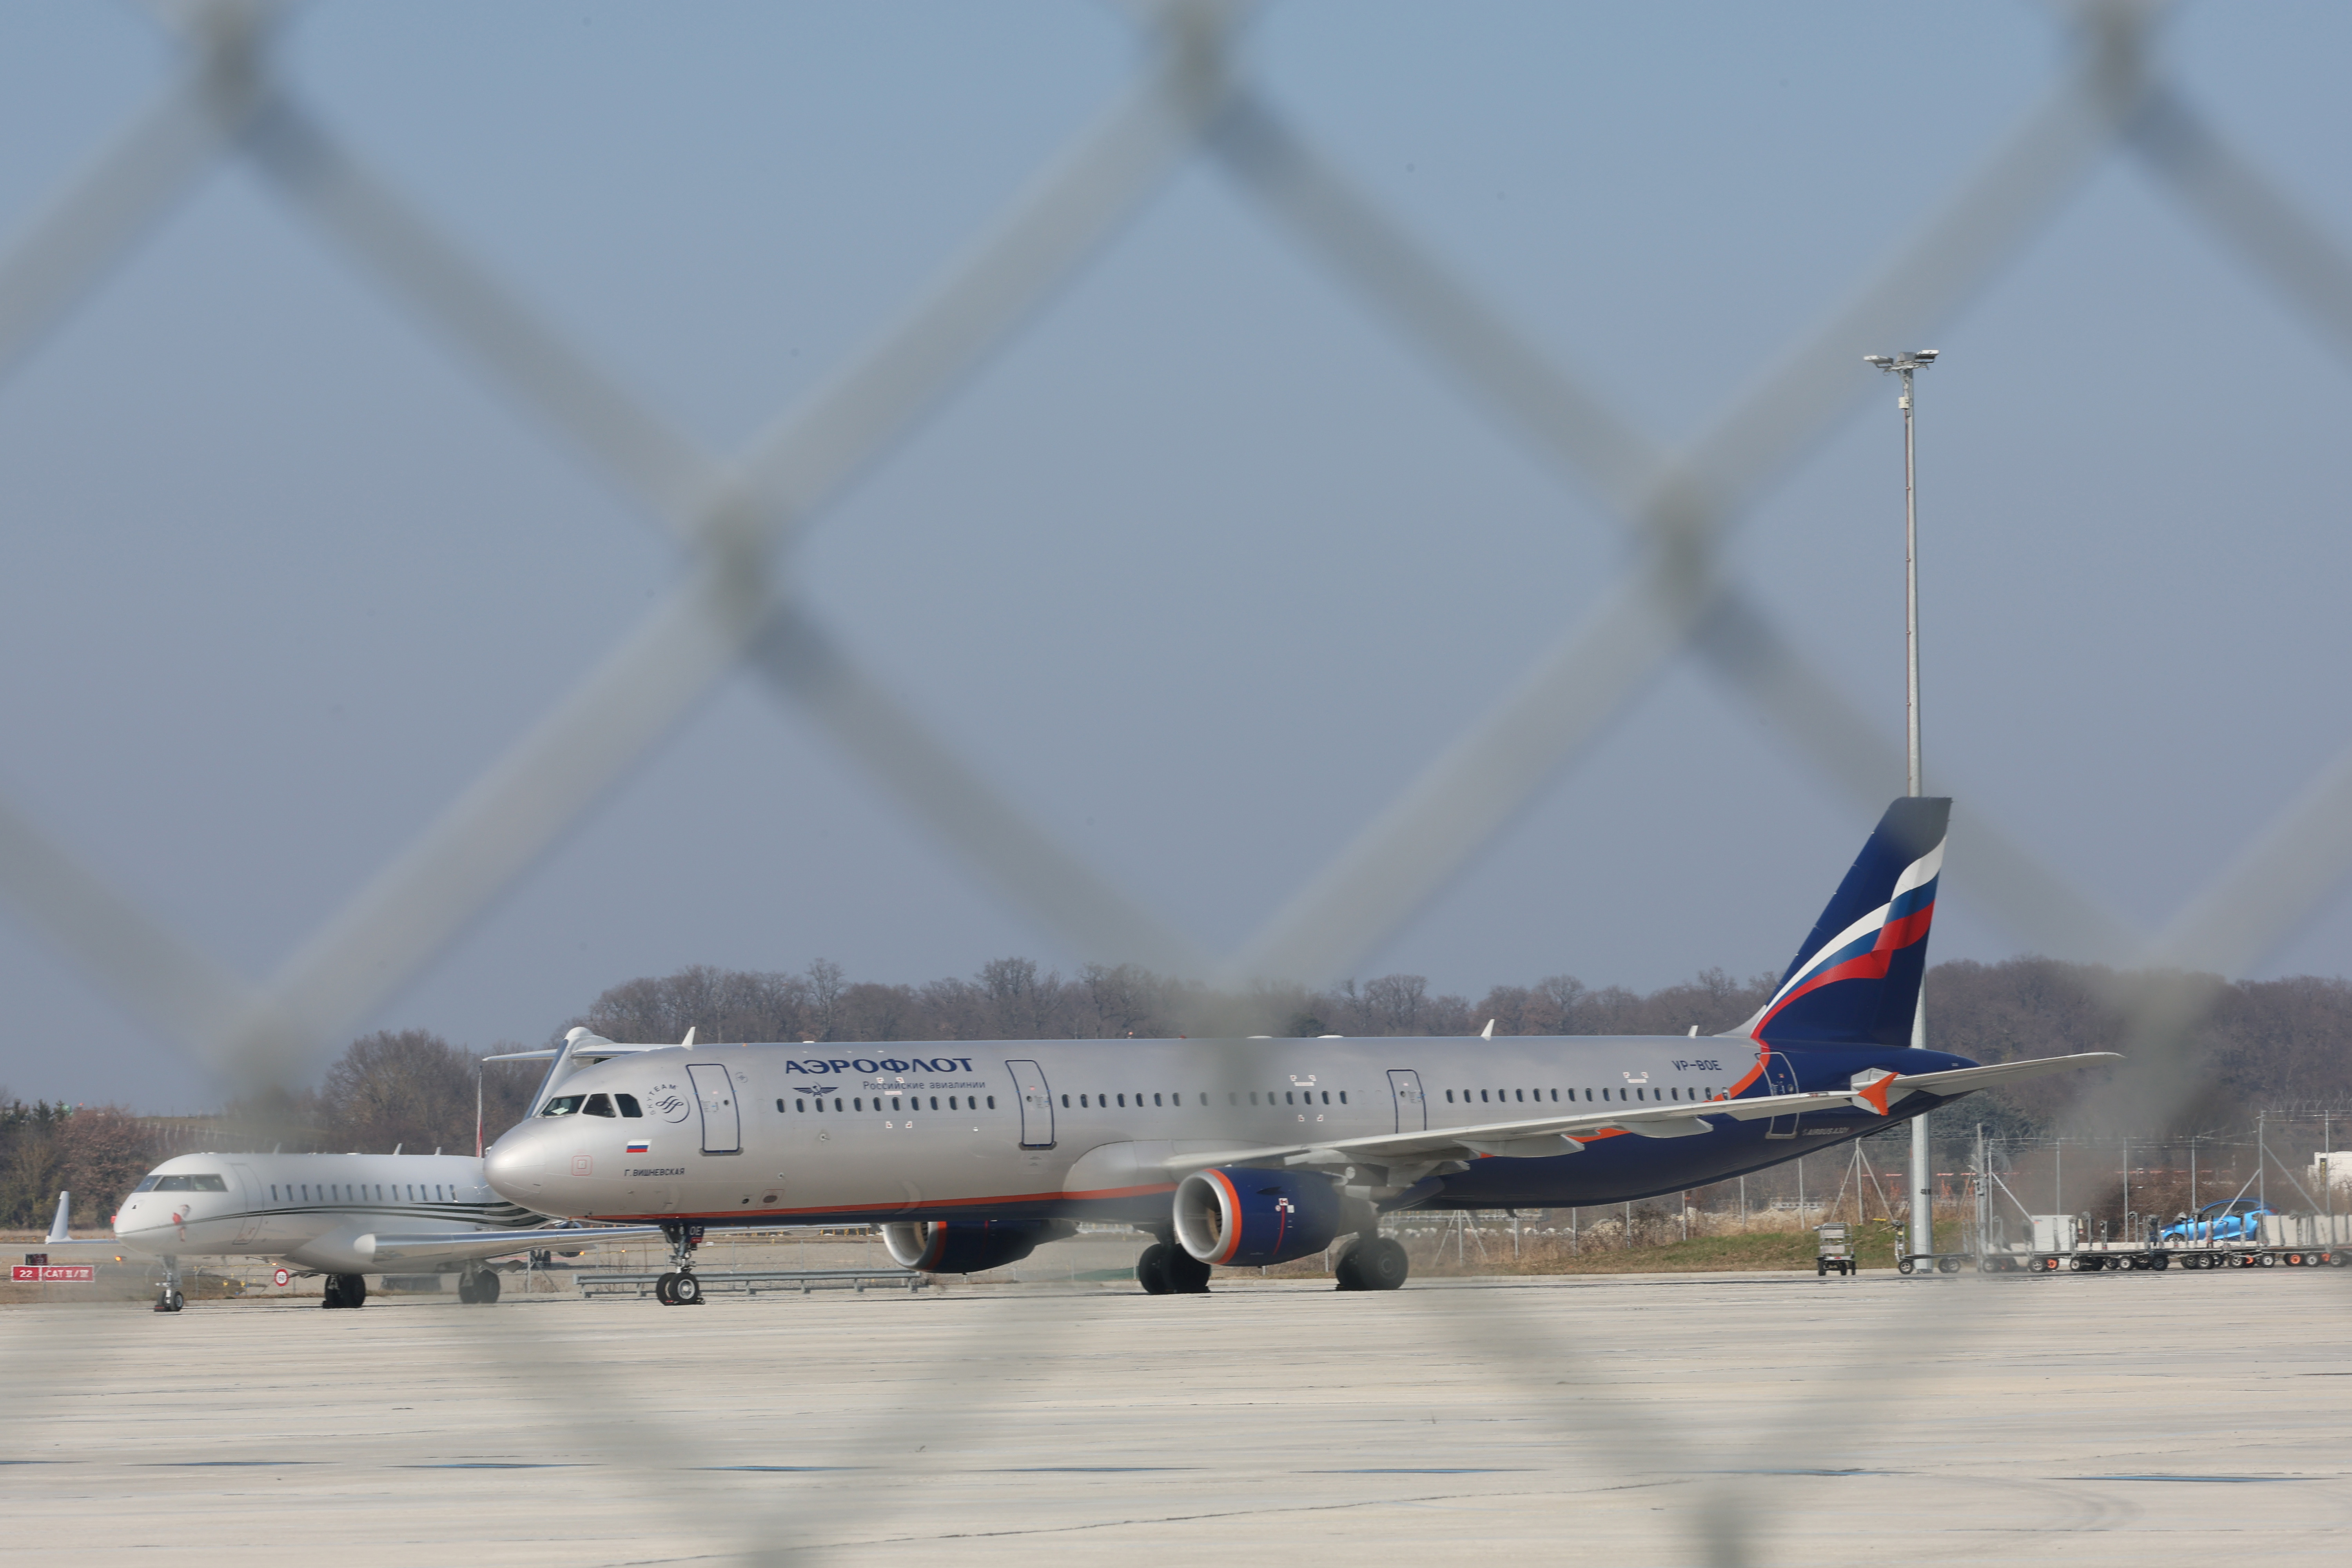 Aircraft of Russian airline Aeroflot is pictured at Cointrin airport in Geneva